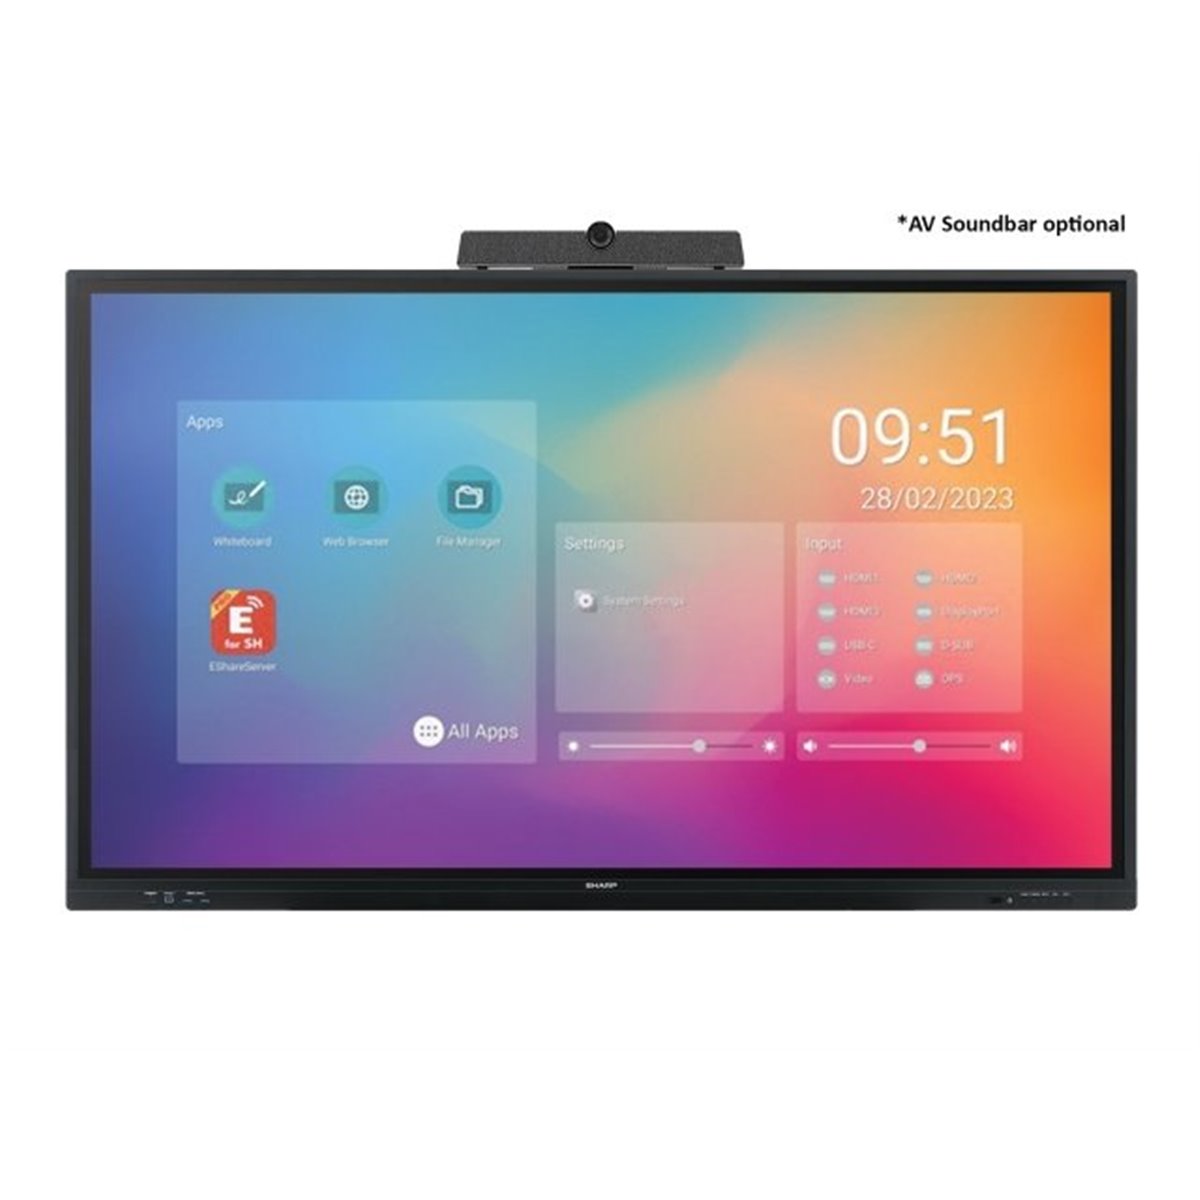 PN-LC652 - 65, interactive display, UHD, 350 cd-m2, Infrared, 20 touch points, OPS Slot, Android SoC, USB-C, HDMI-out.